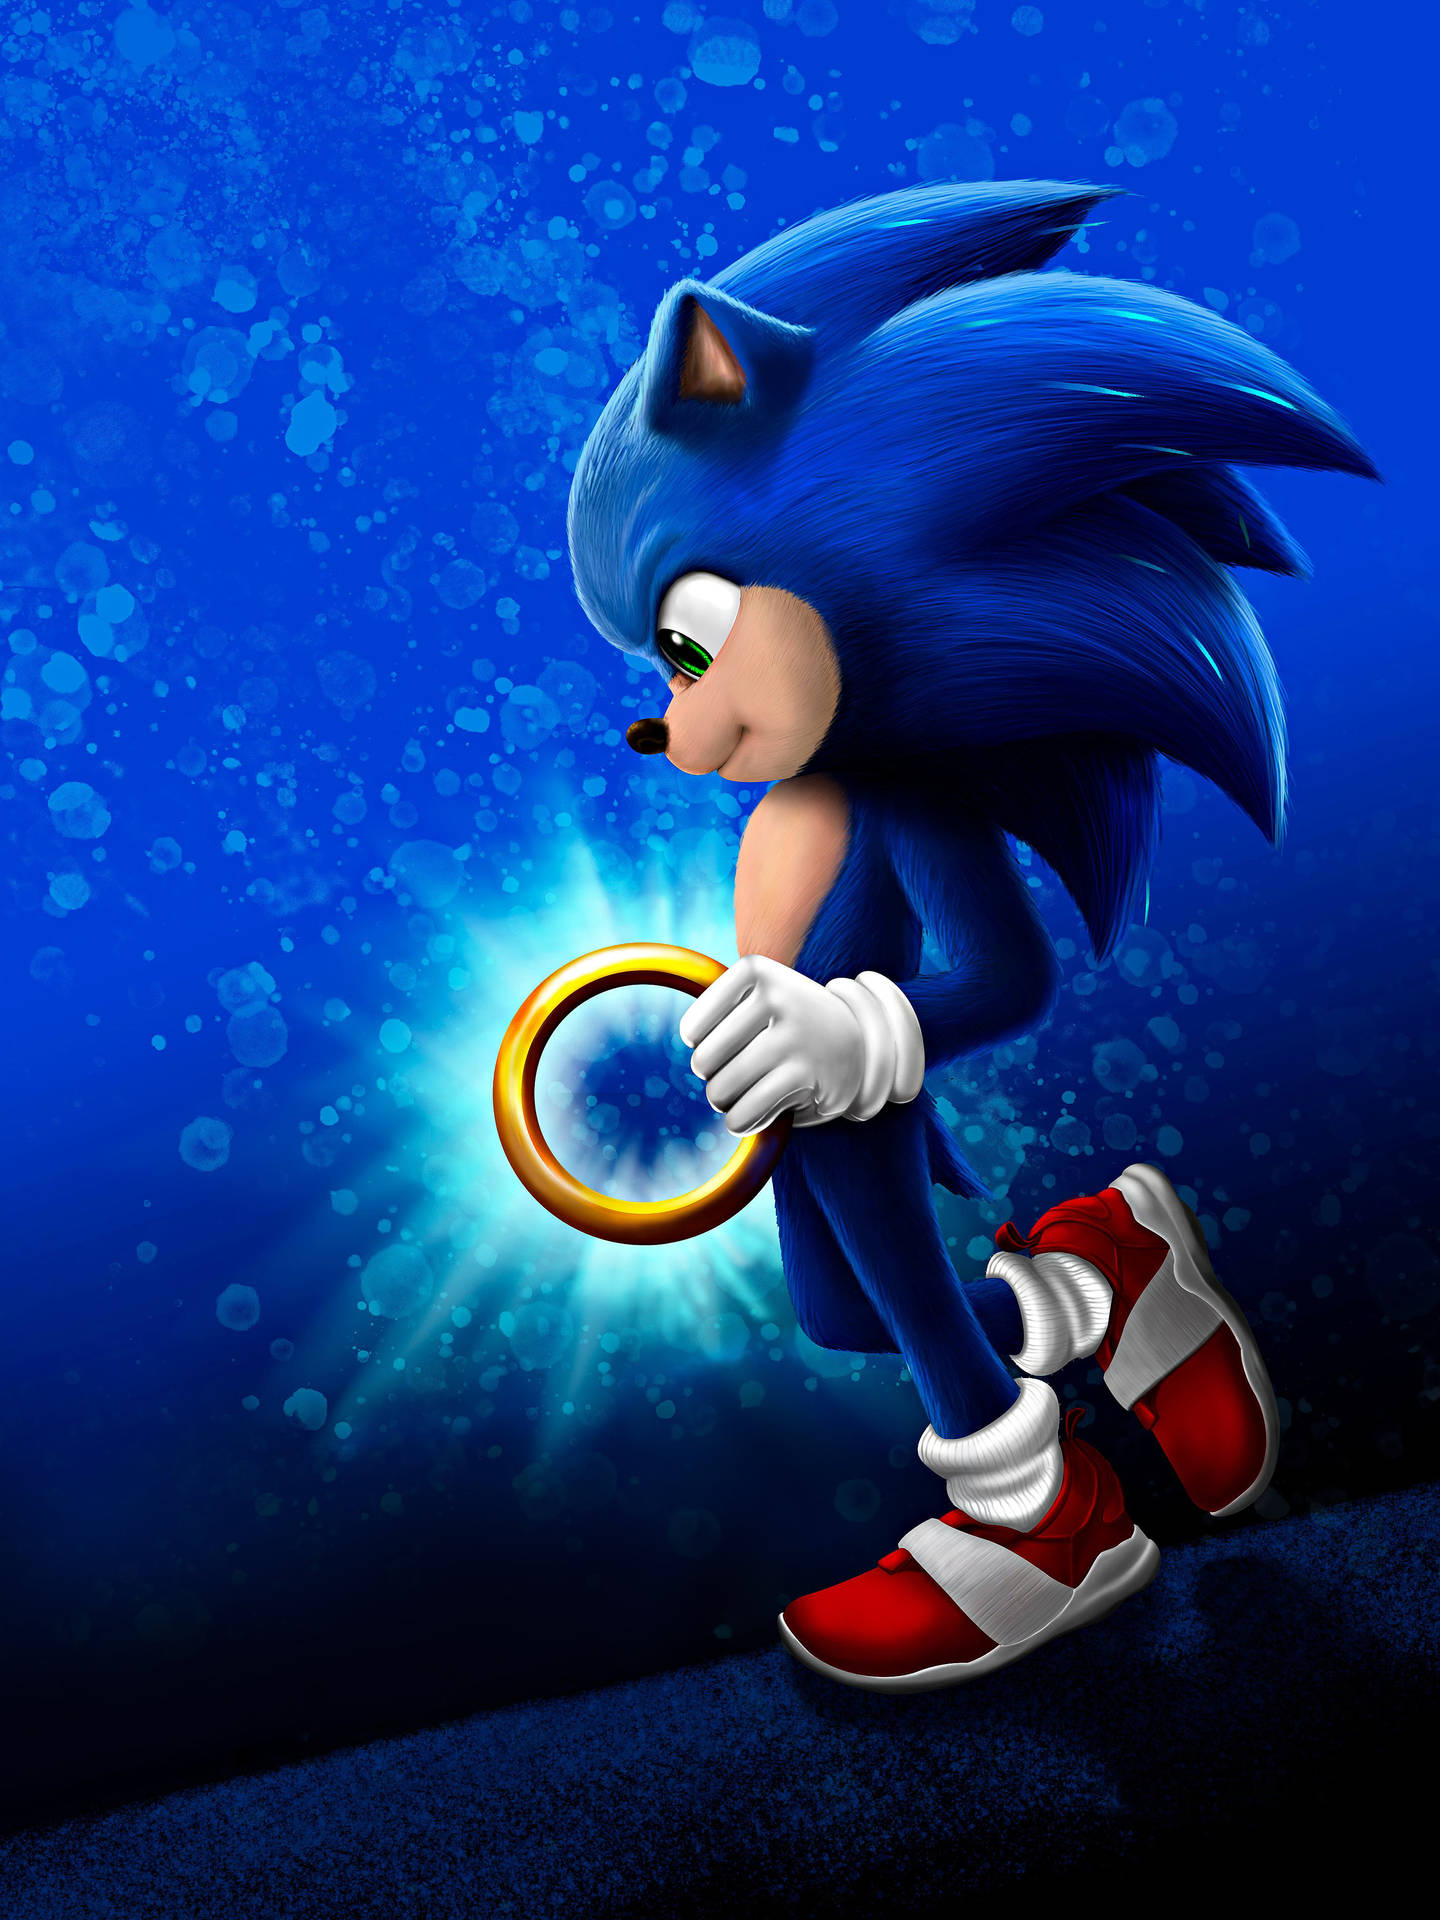 Sonic The Hedgehog With A Glowing Ring